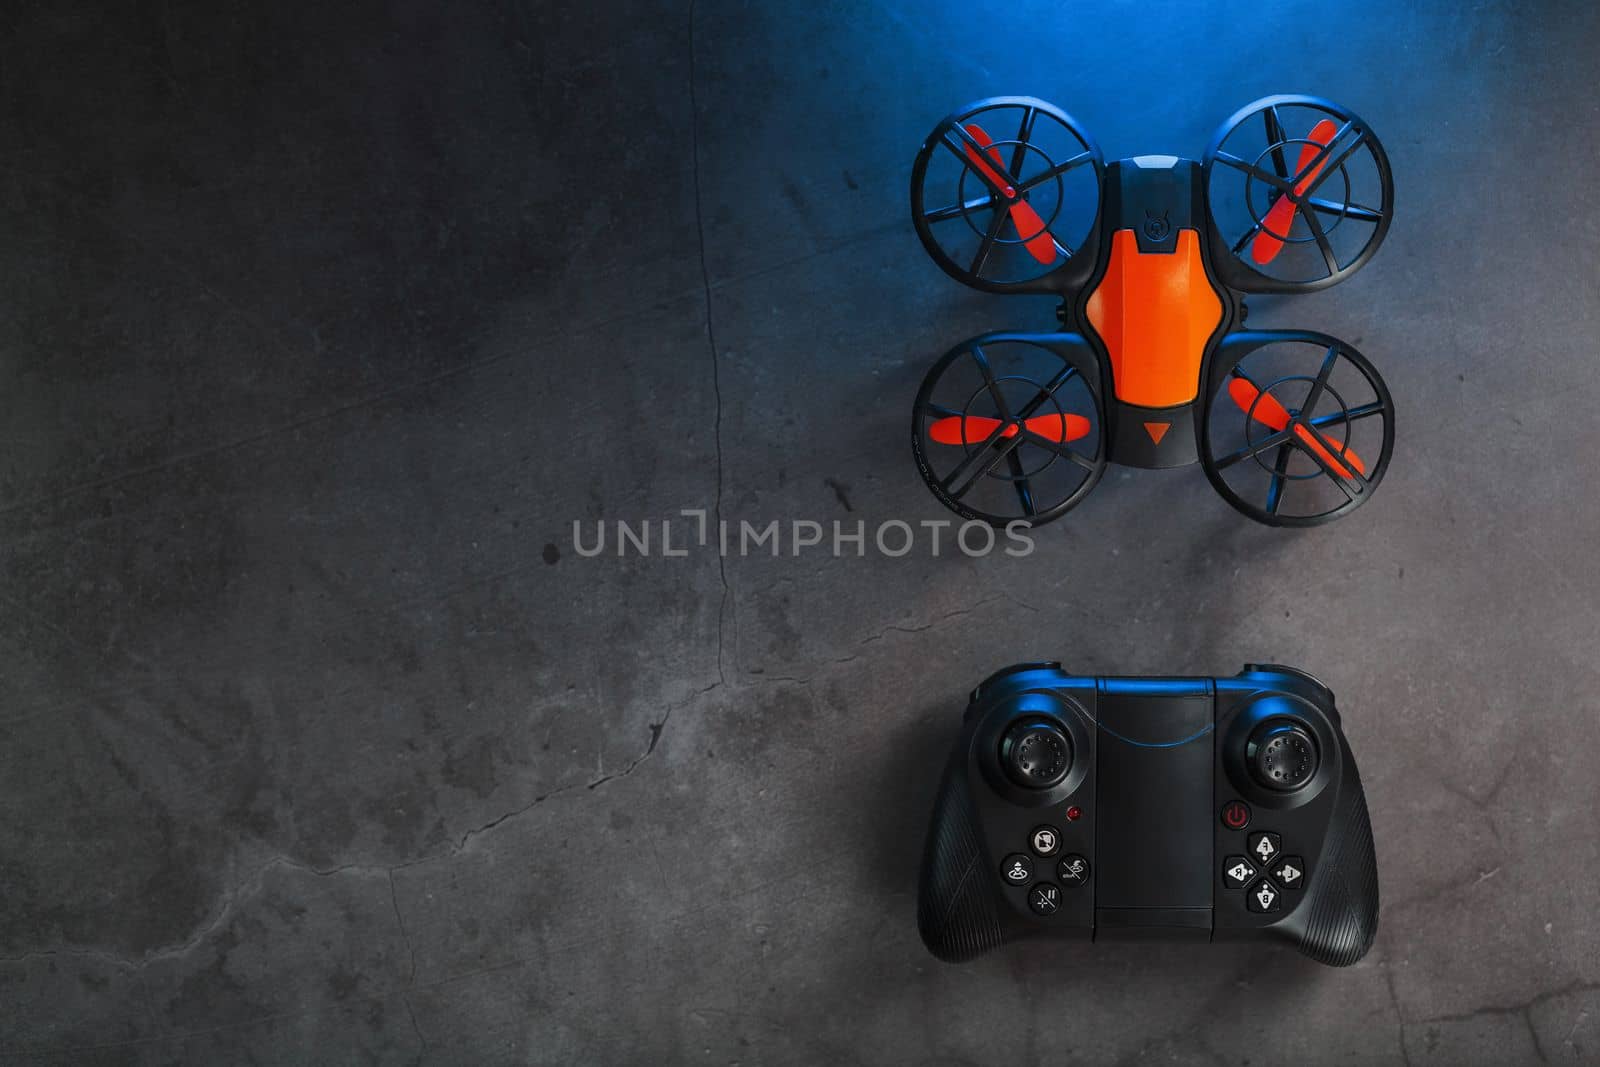 A reconnaissance quadcopter drone with an orange body and blue LED backlight on a dark background